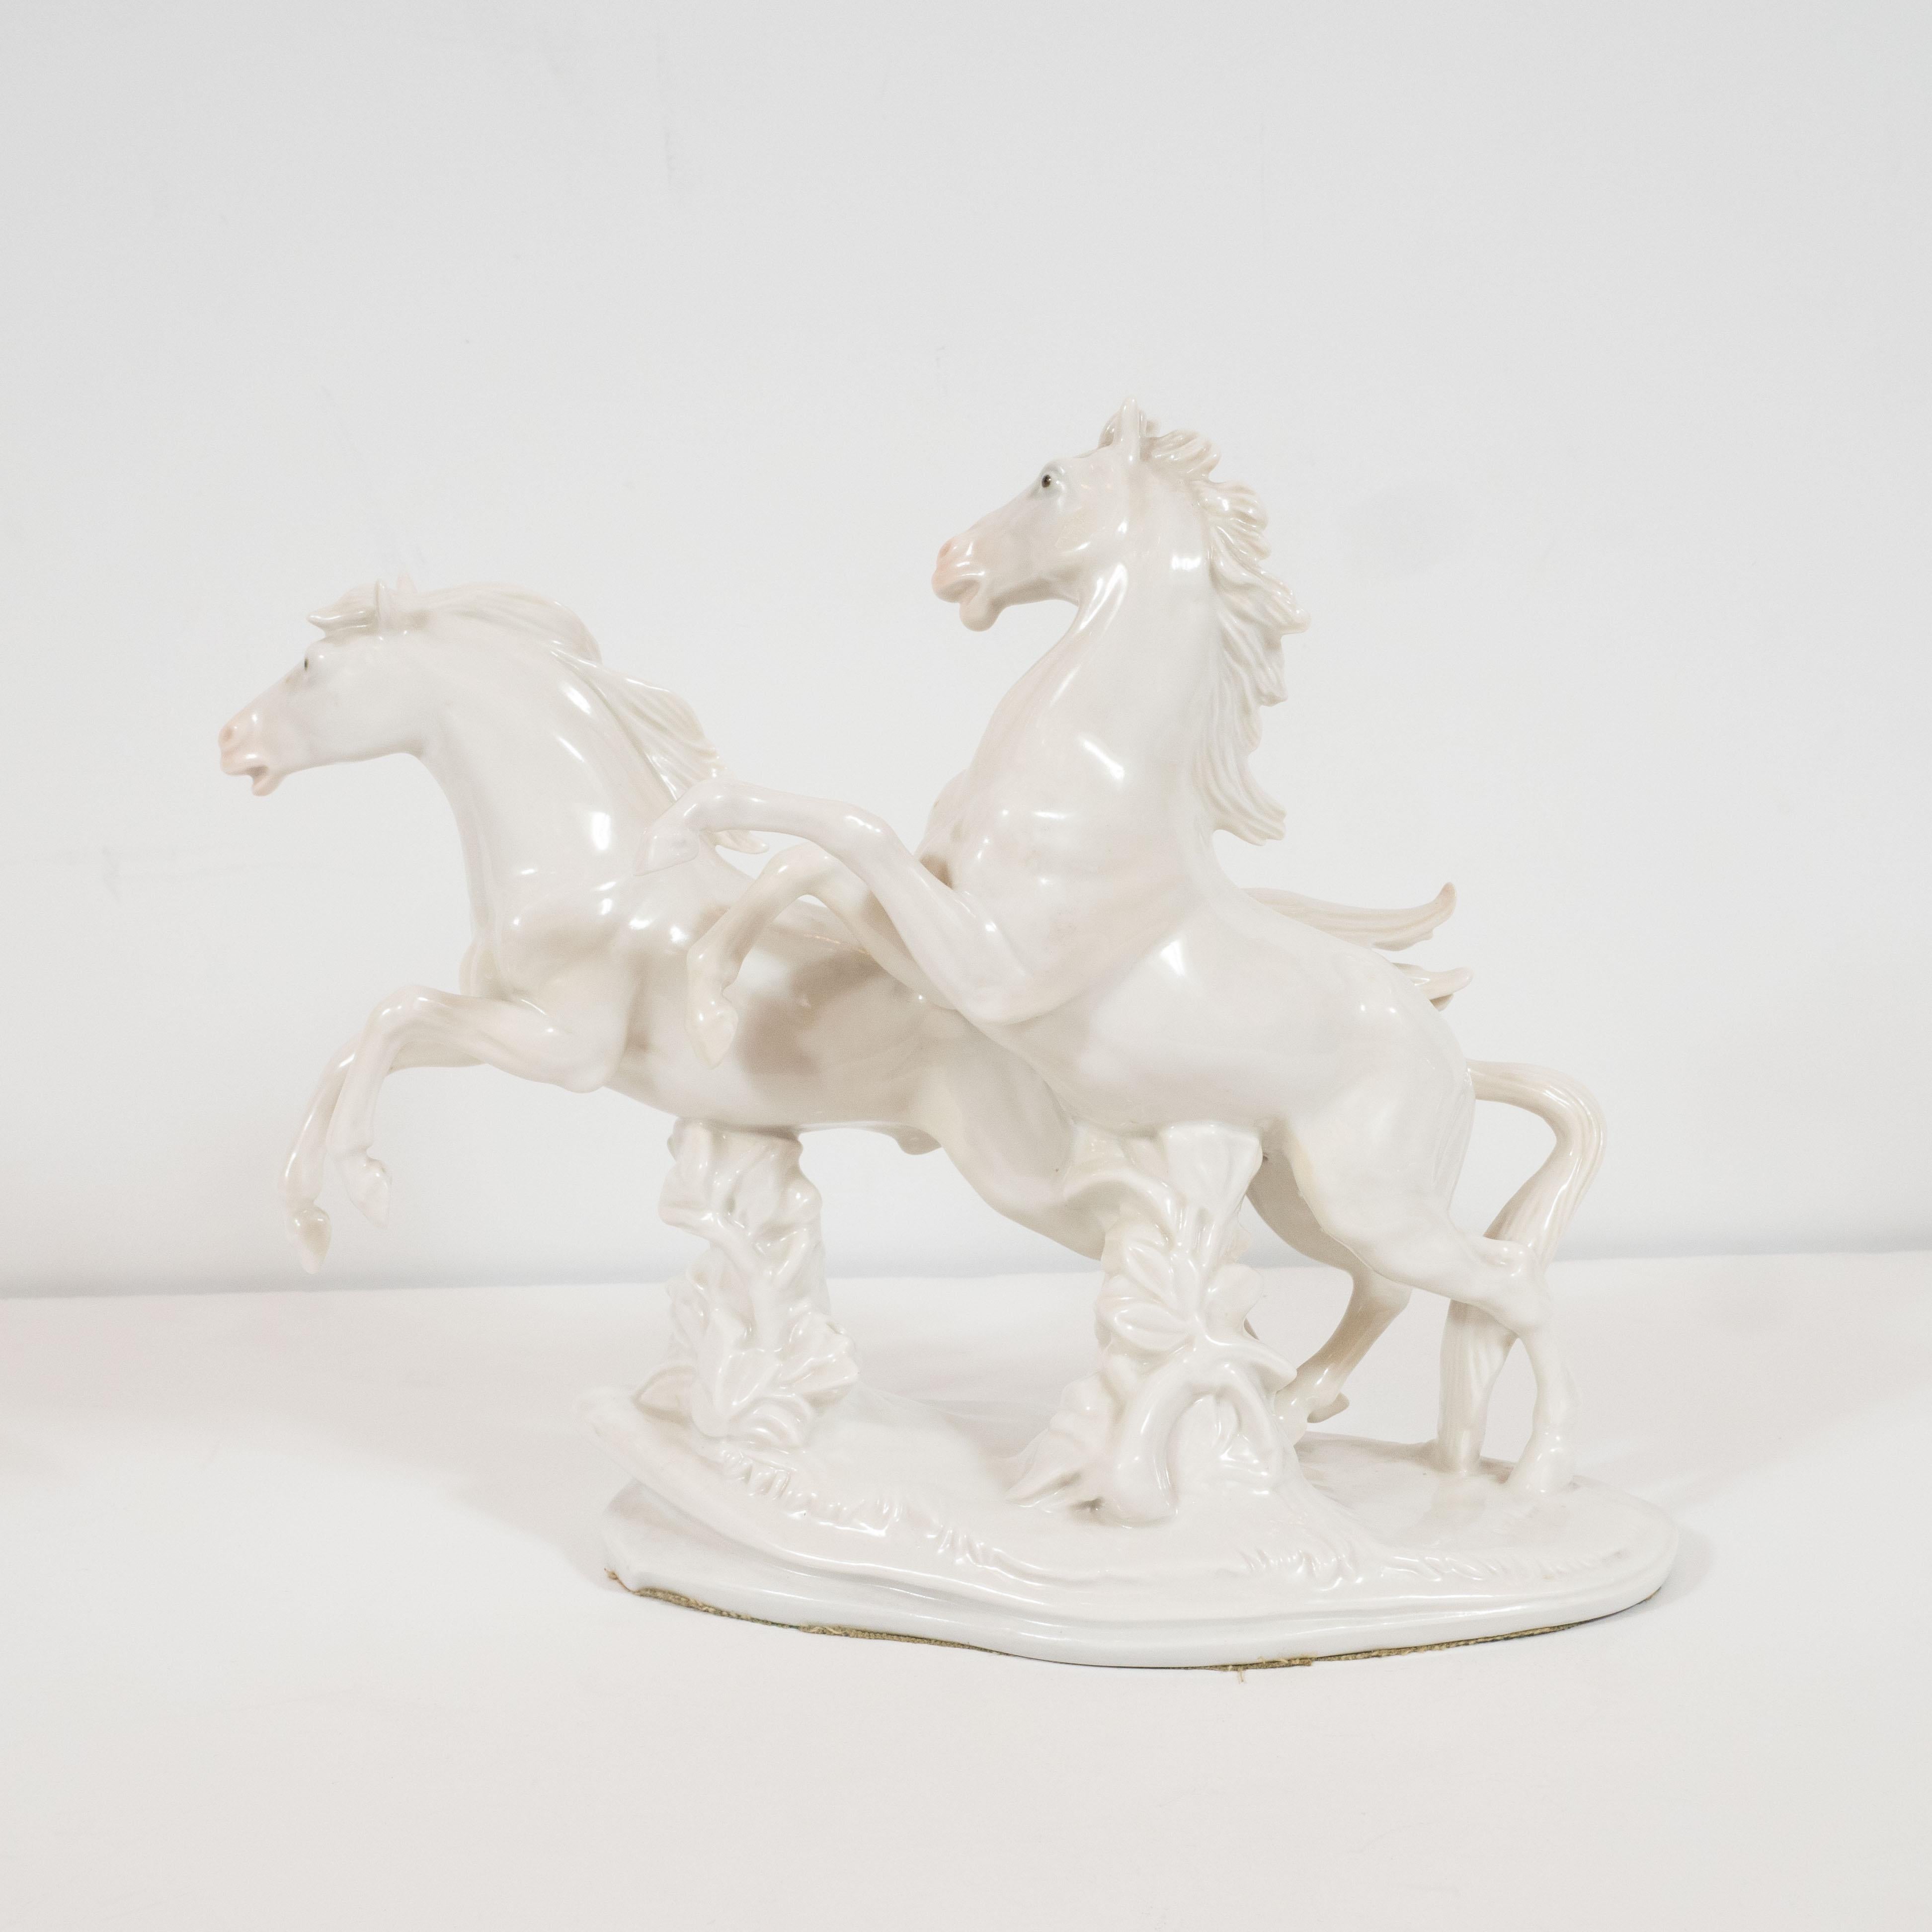 Art Deco White Porcelain Galloping Horse Sculptures Signed by Karl Ens ...